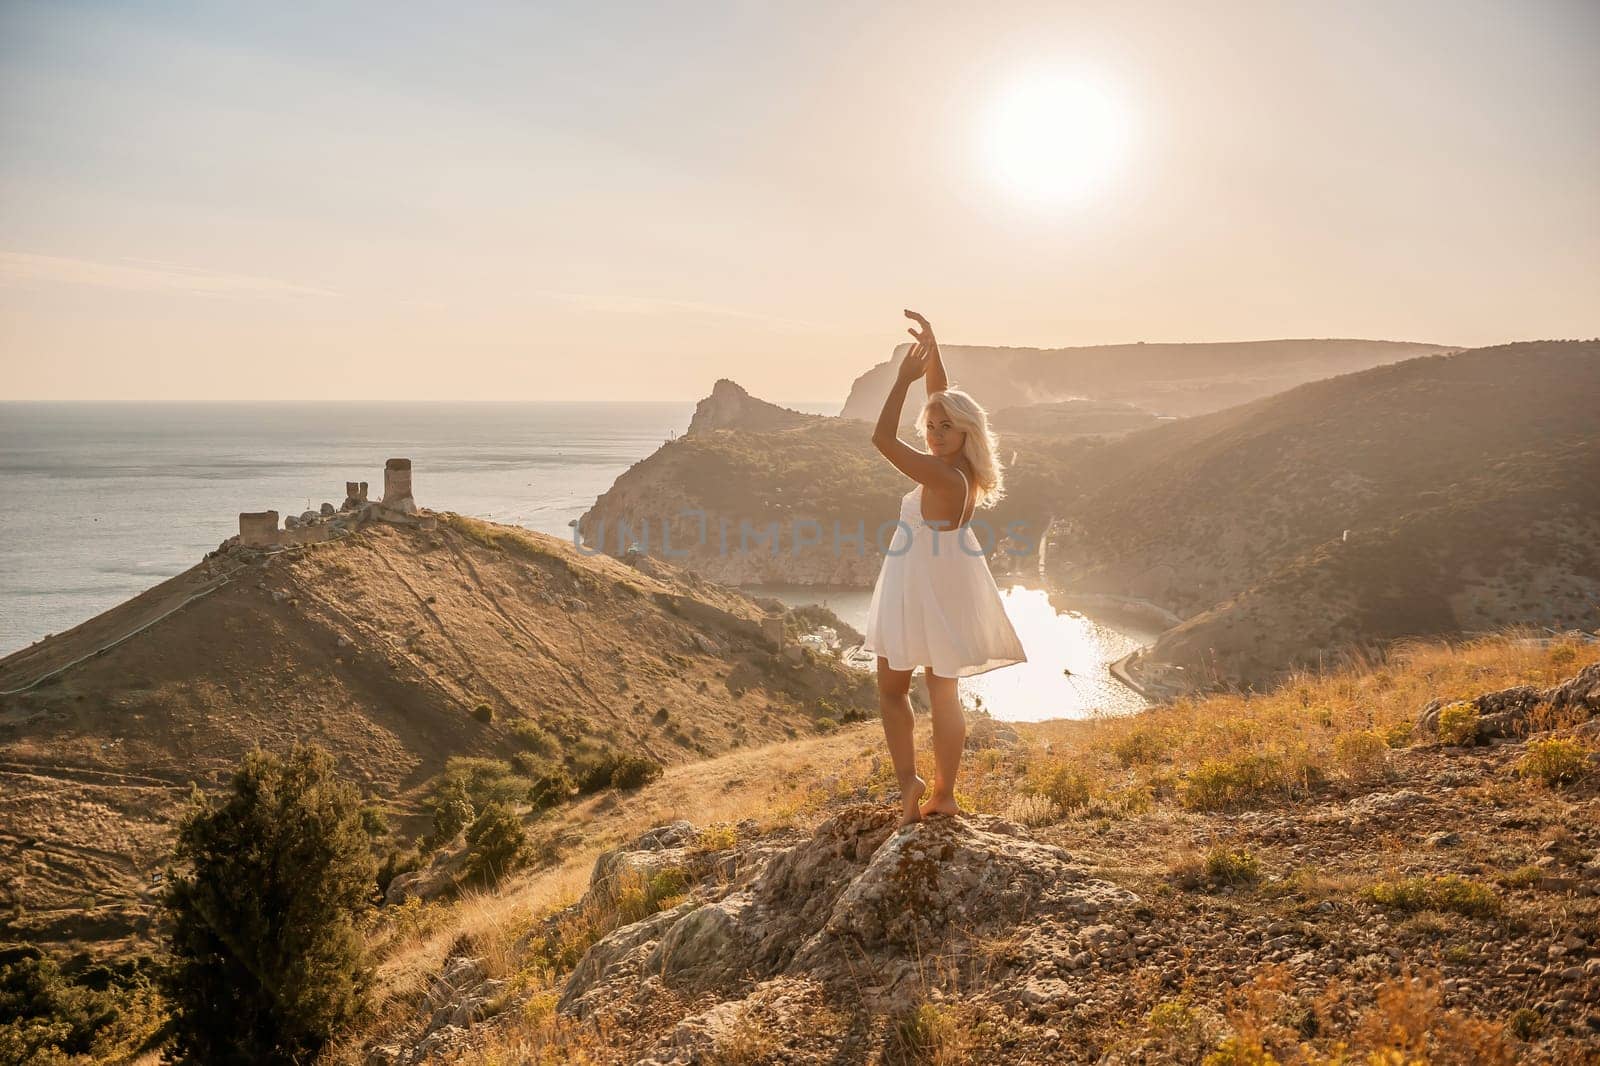 A woman stands on a hill overlooking a body of water. She is wearing a white dress and she is enjoying the view